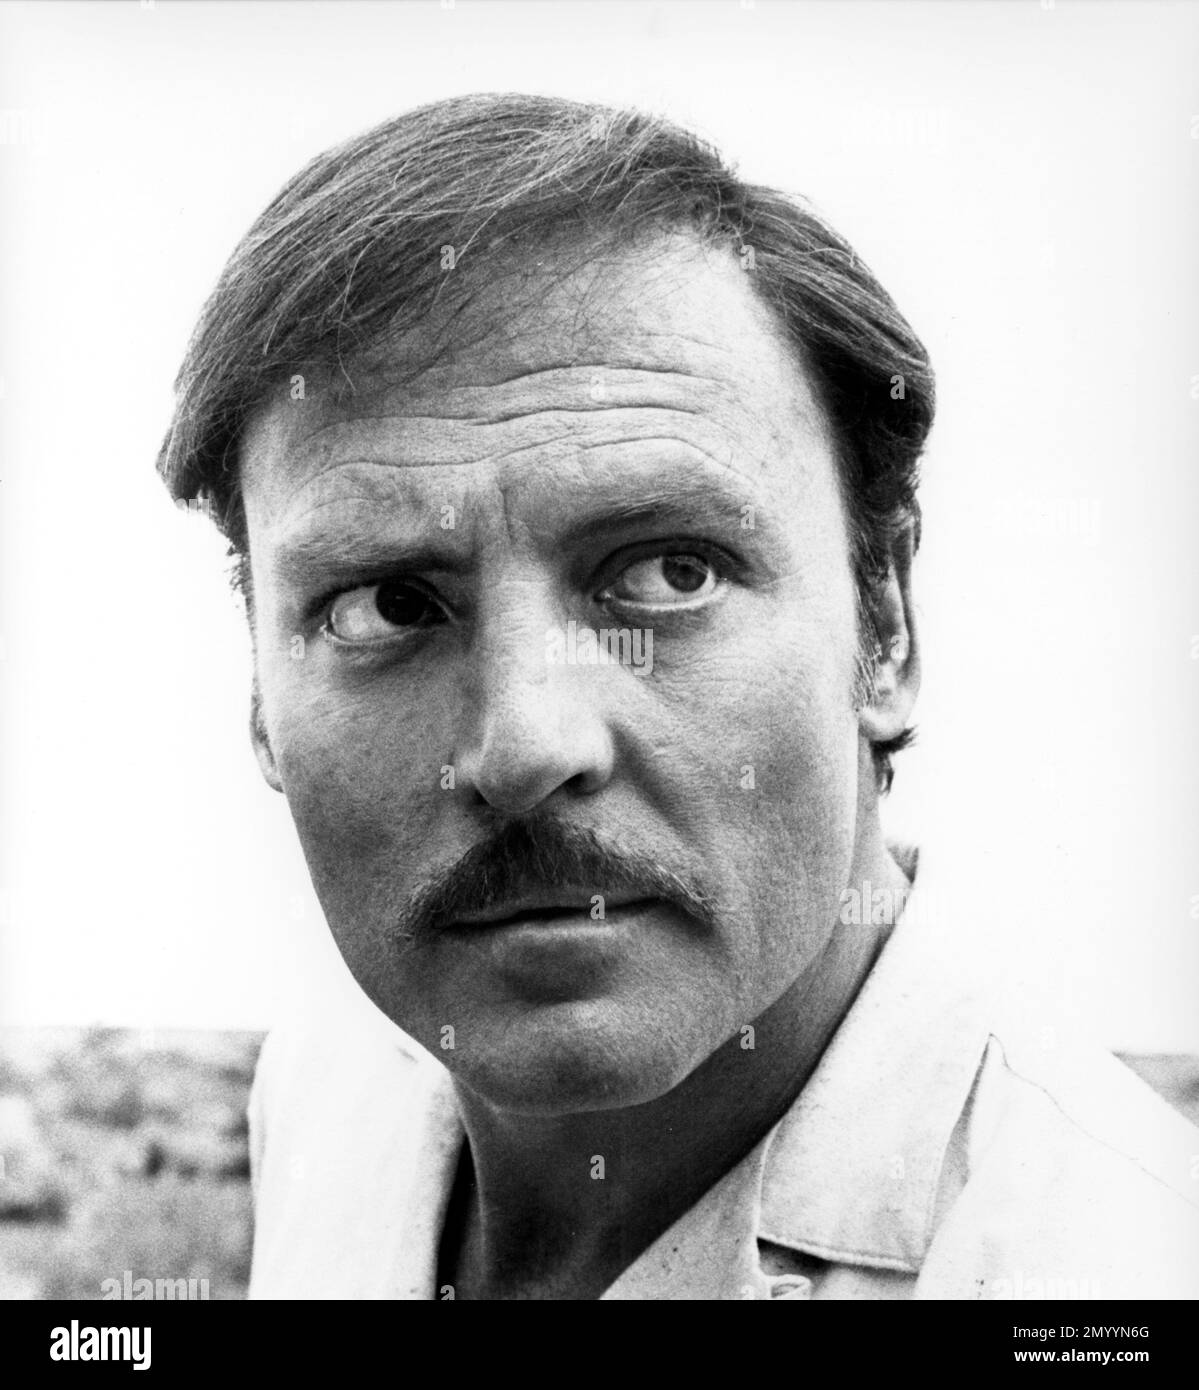 STACY KEACH in ROADGAMES (1981), directed by RICHARD FRANKLIN. Credit: ESSANESS PICTURES / Album Stock Photo